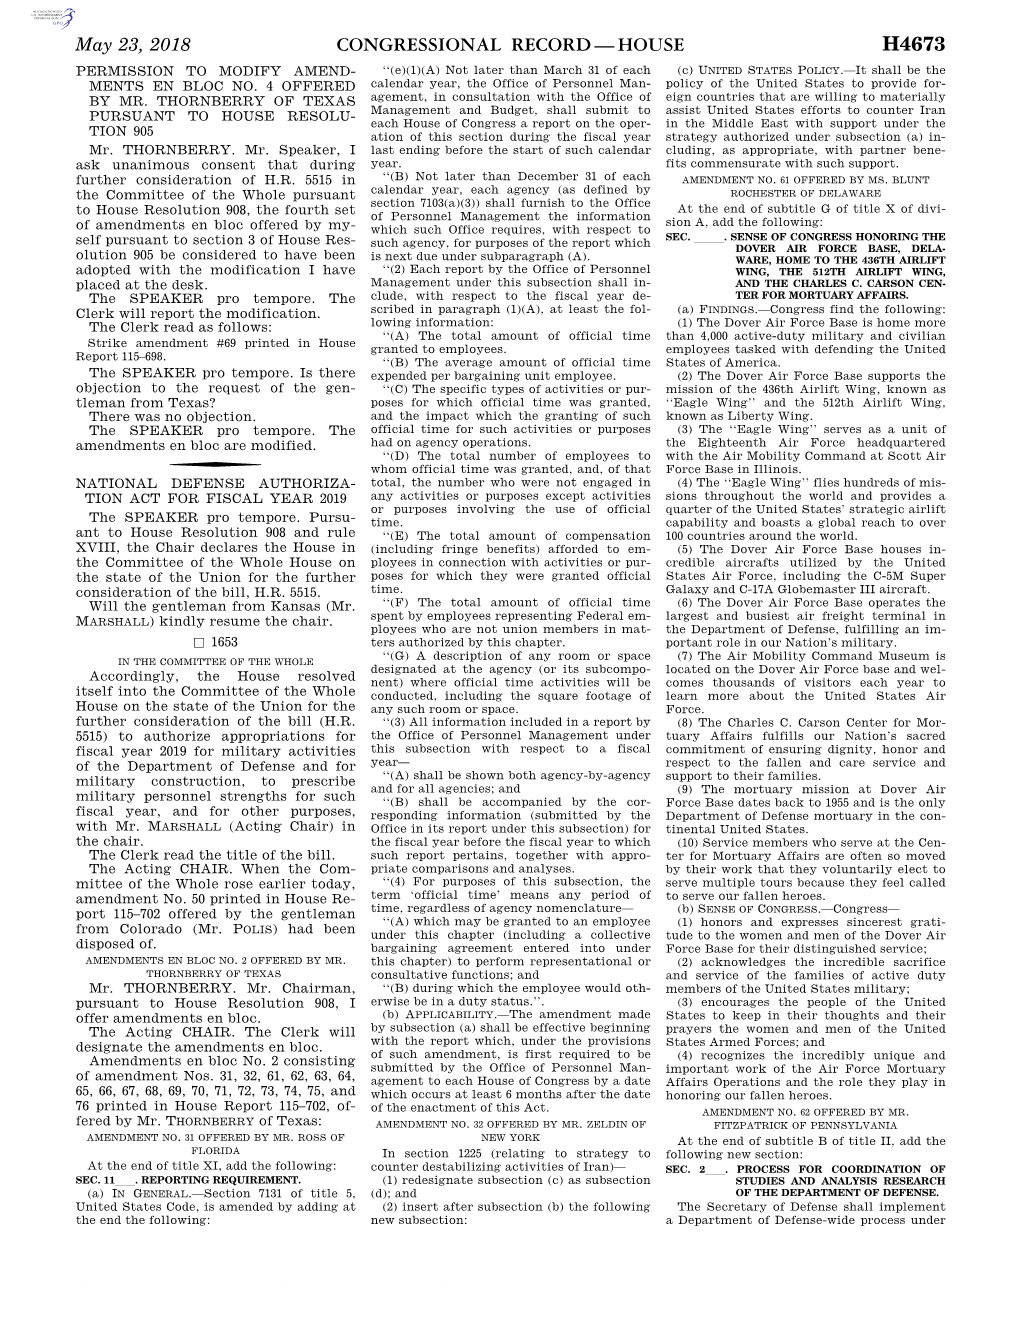 Congressional Record—House H4673